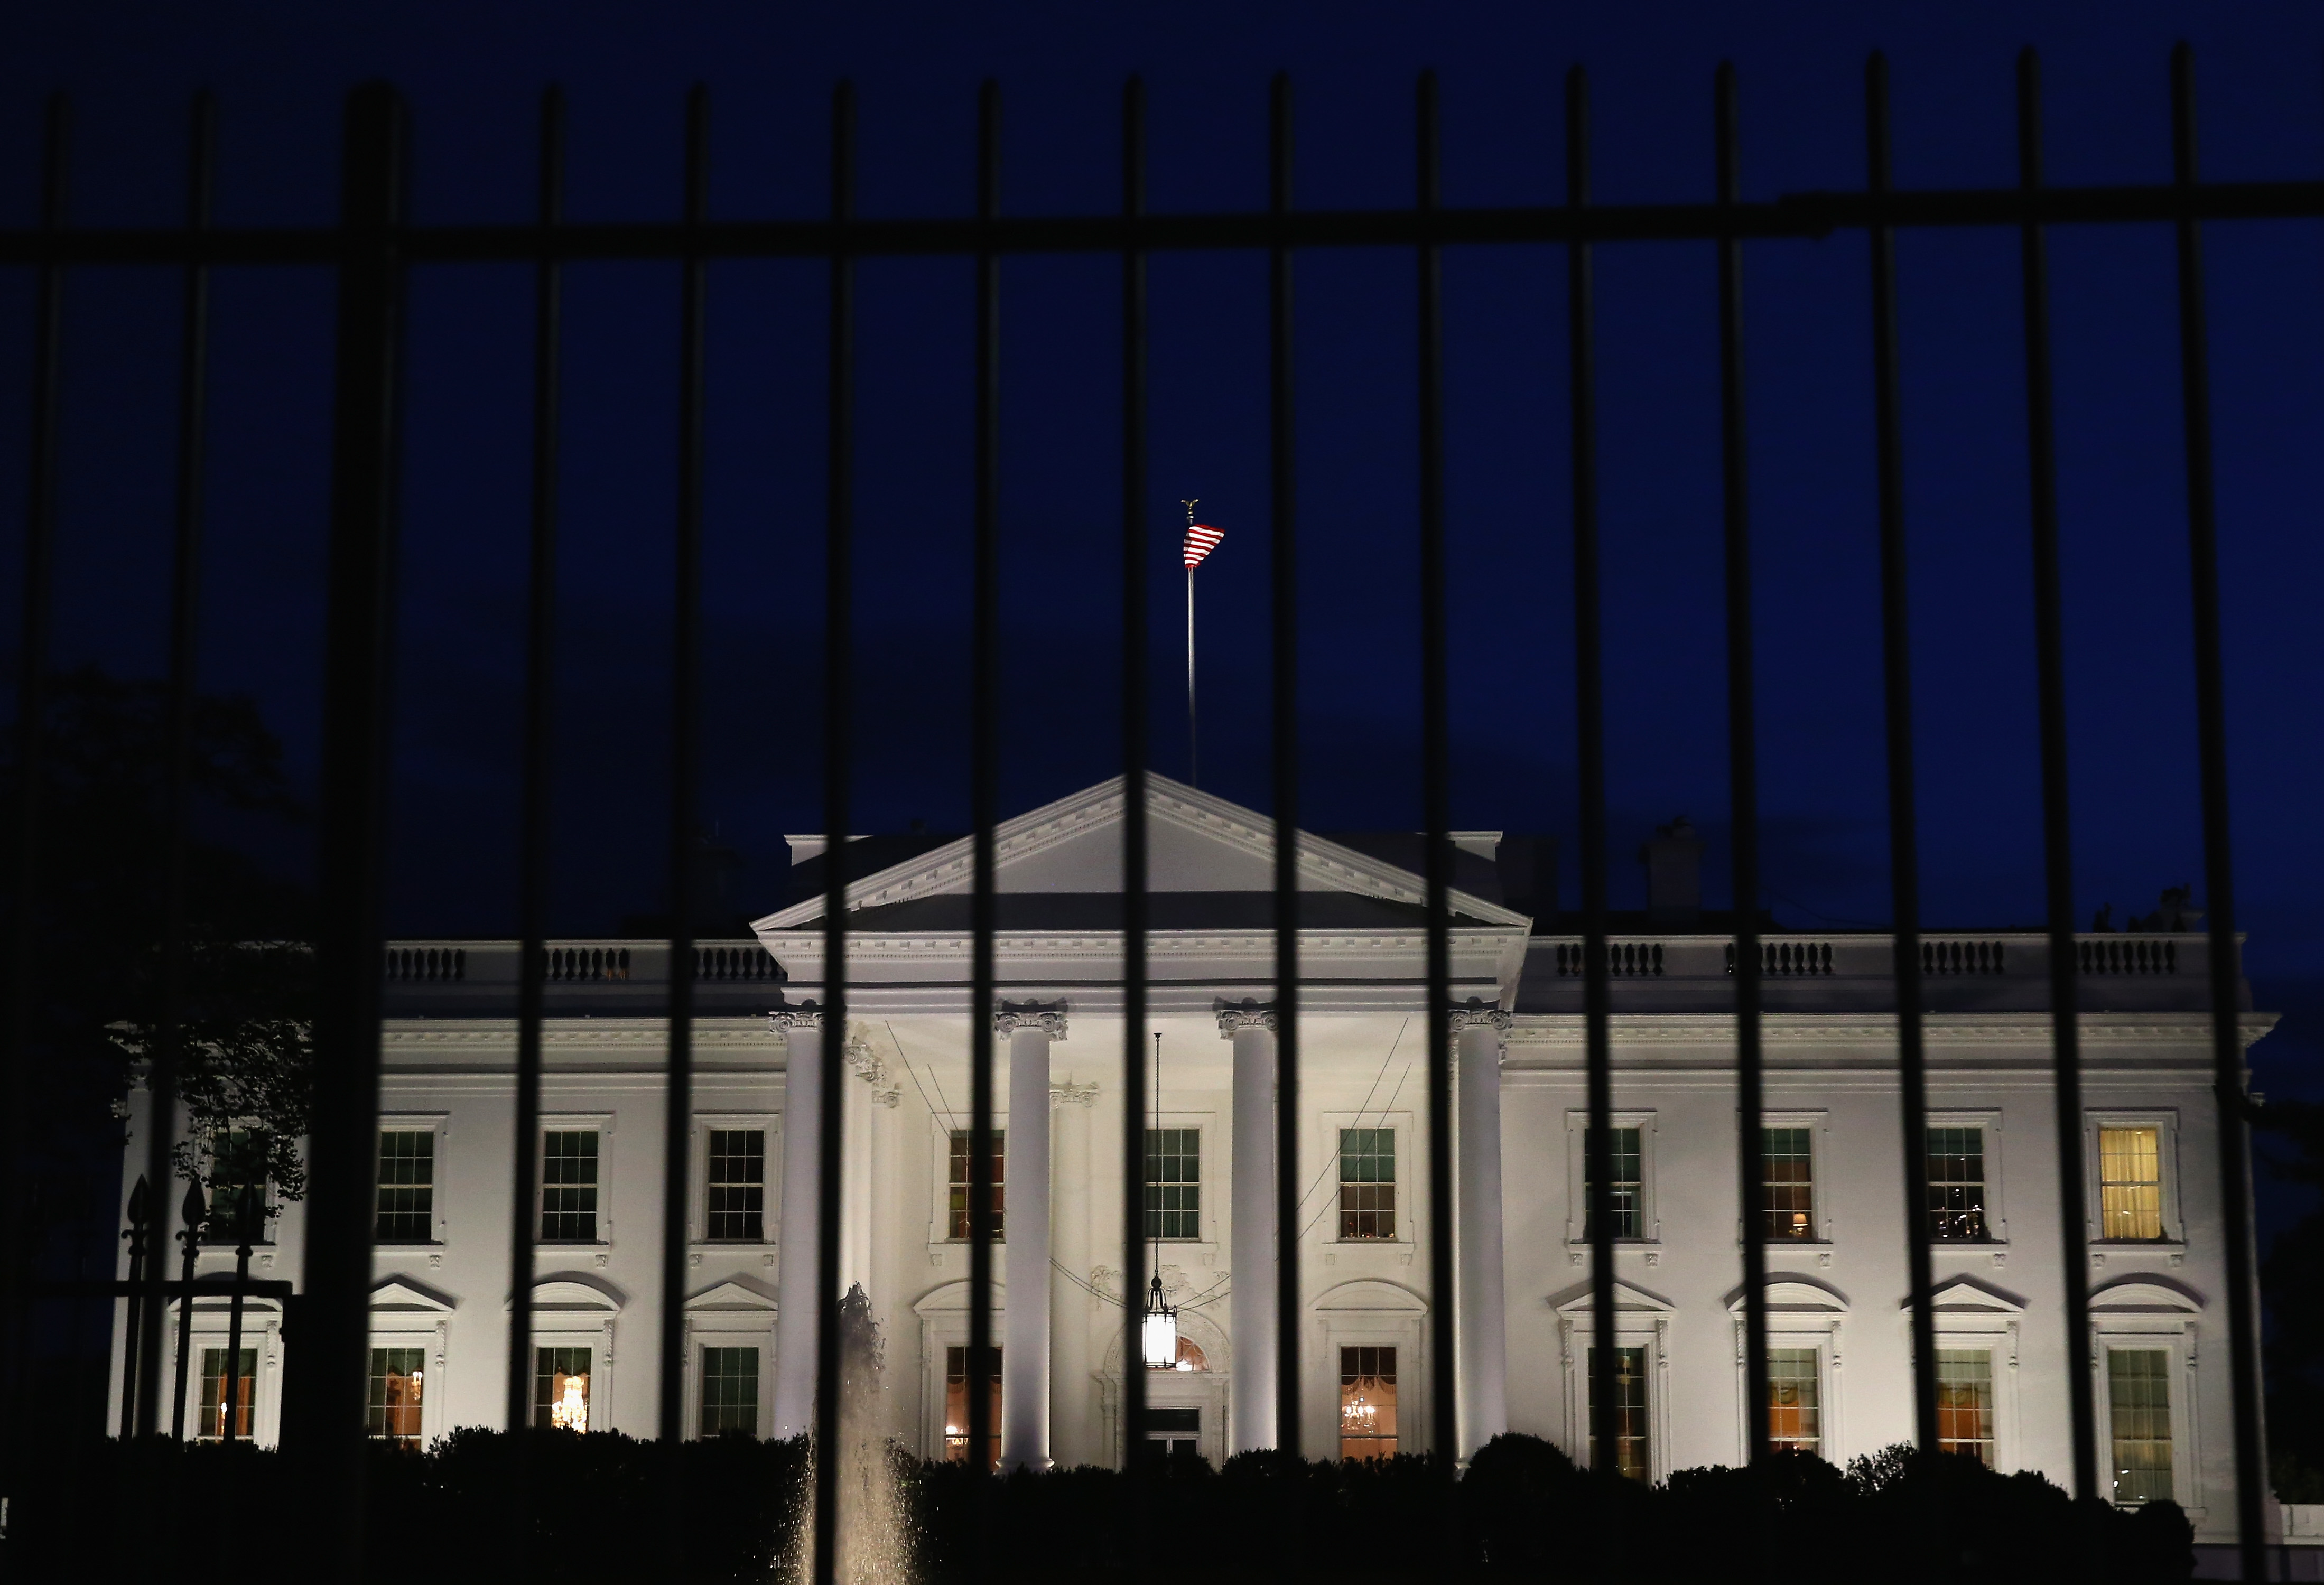 A tall security fence stands in front of the White House on Nov. 4, 2014 in Washington. (Mark Wilson—Getty Images)